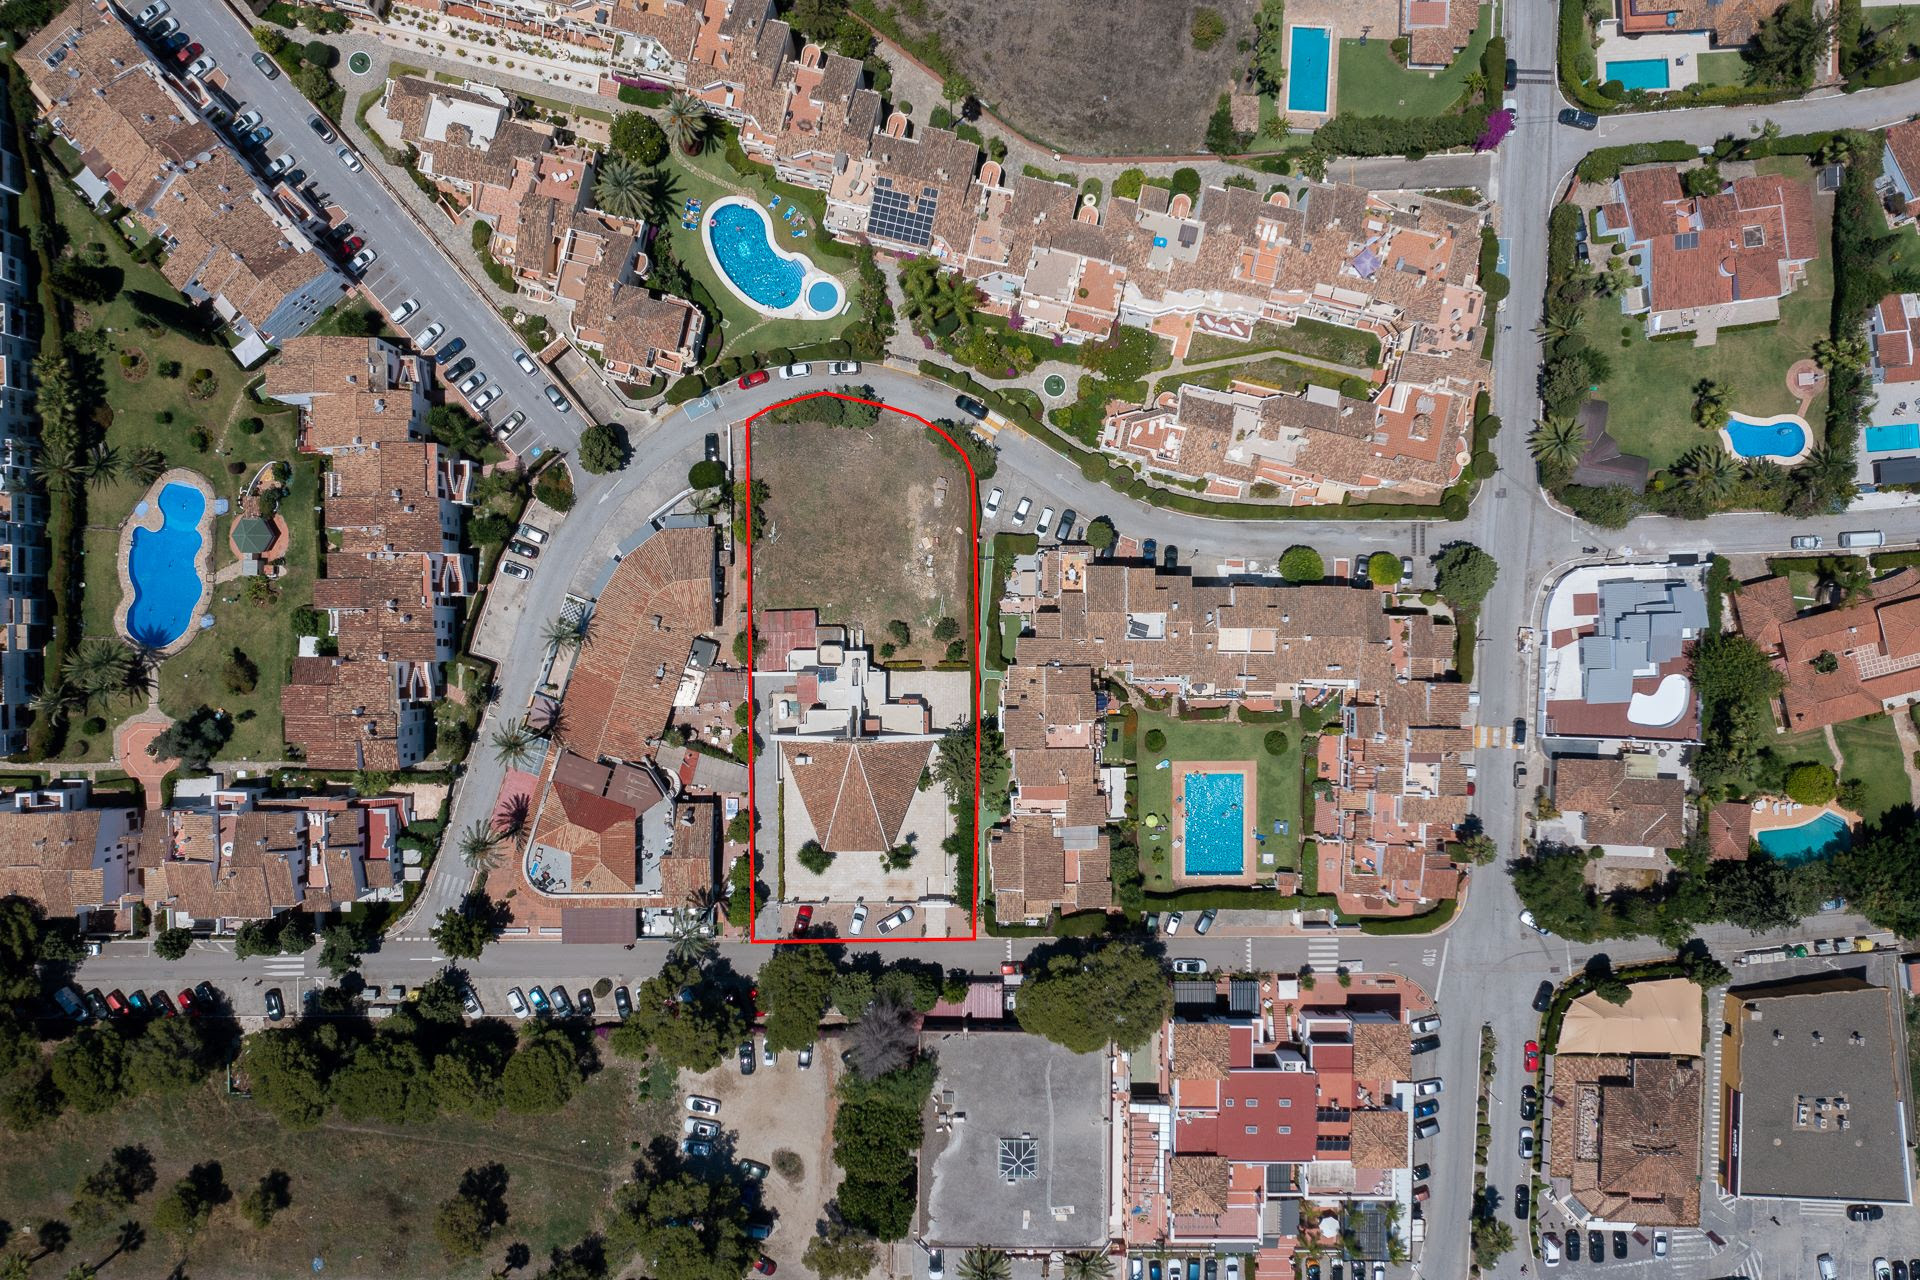 Commercial plot with great development potential in the area of El Pilar